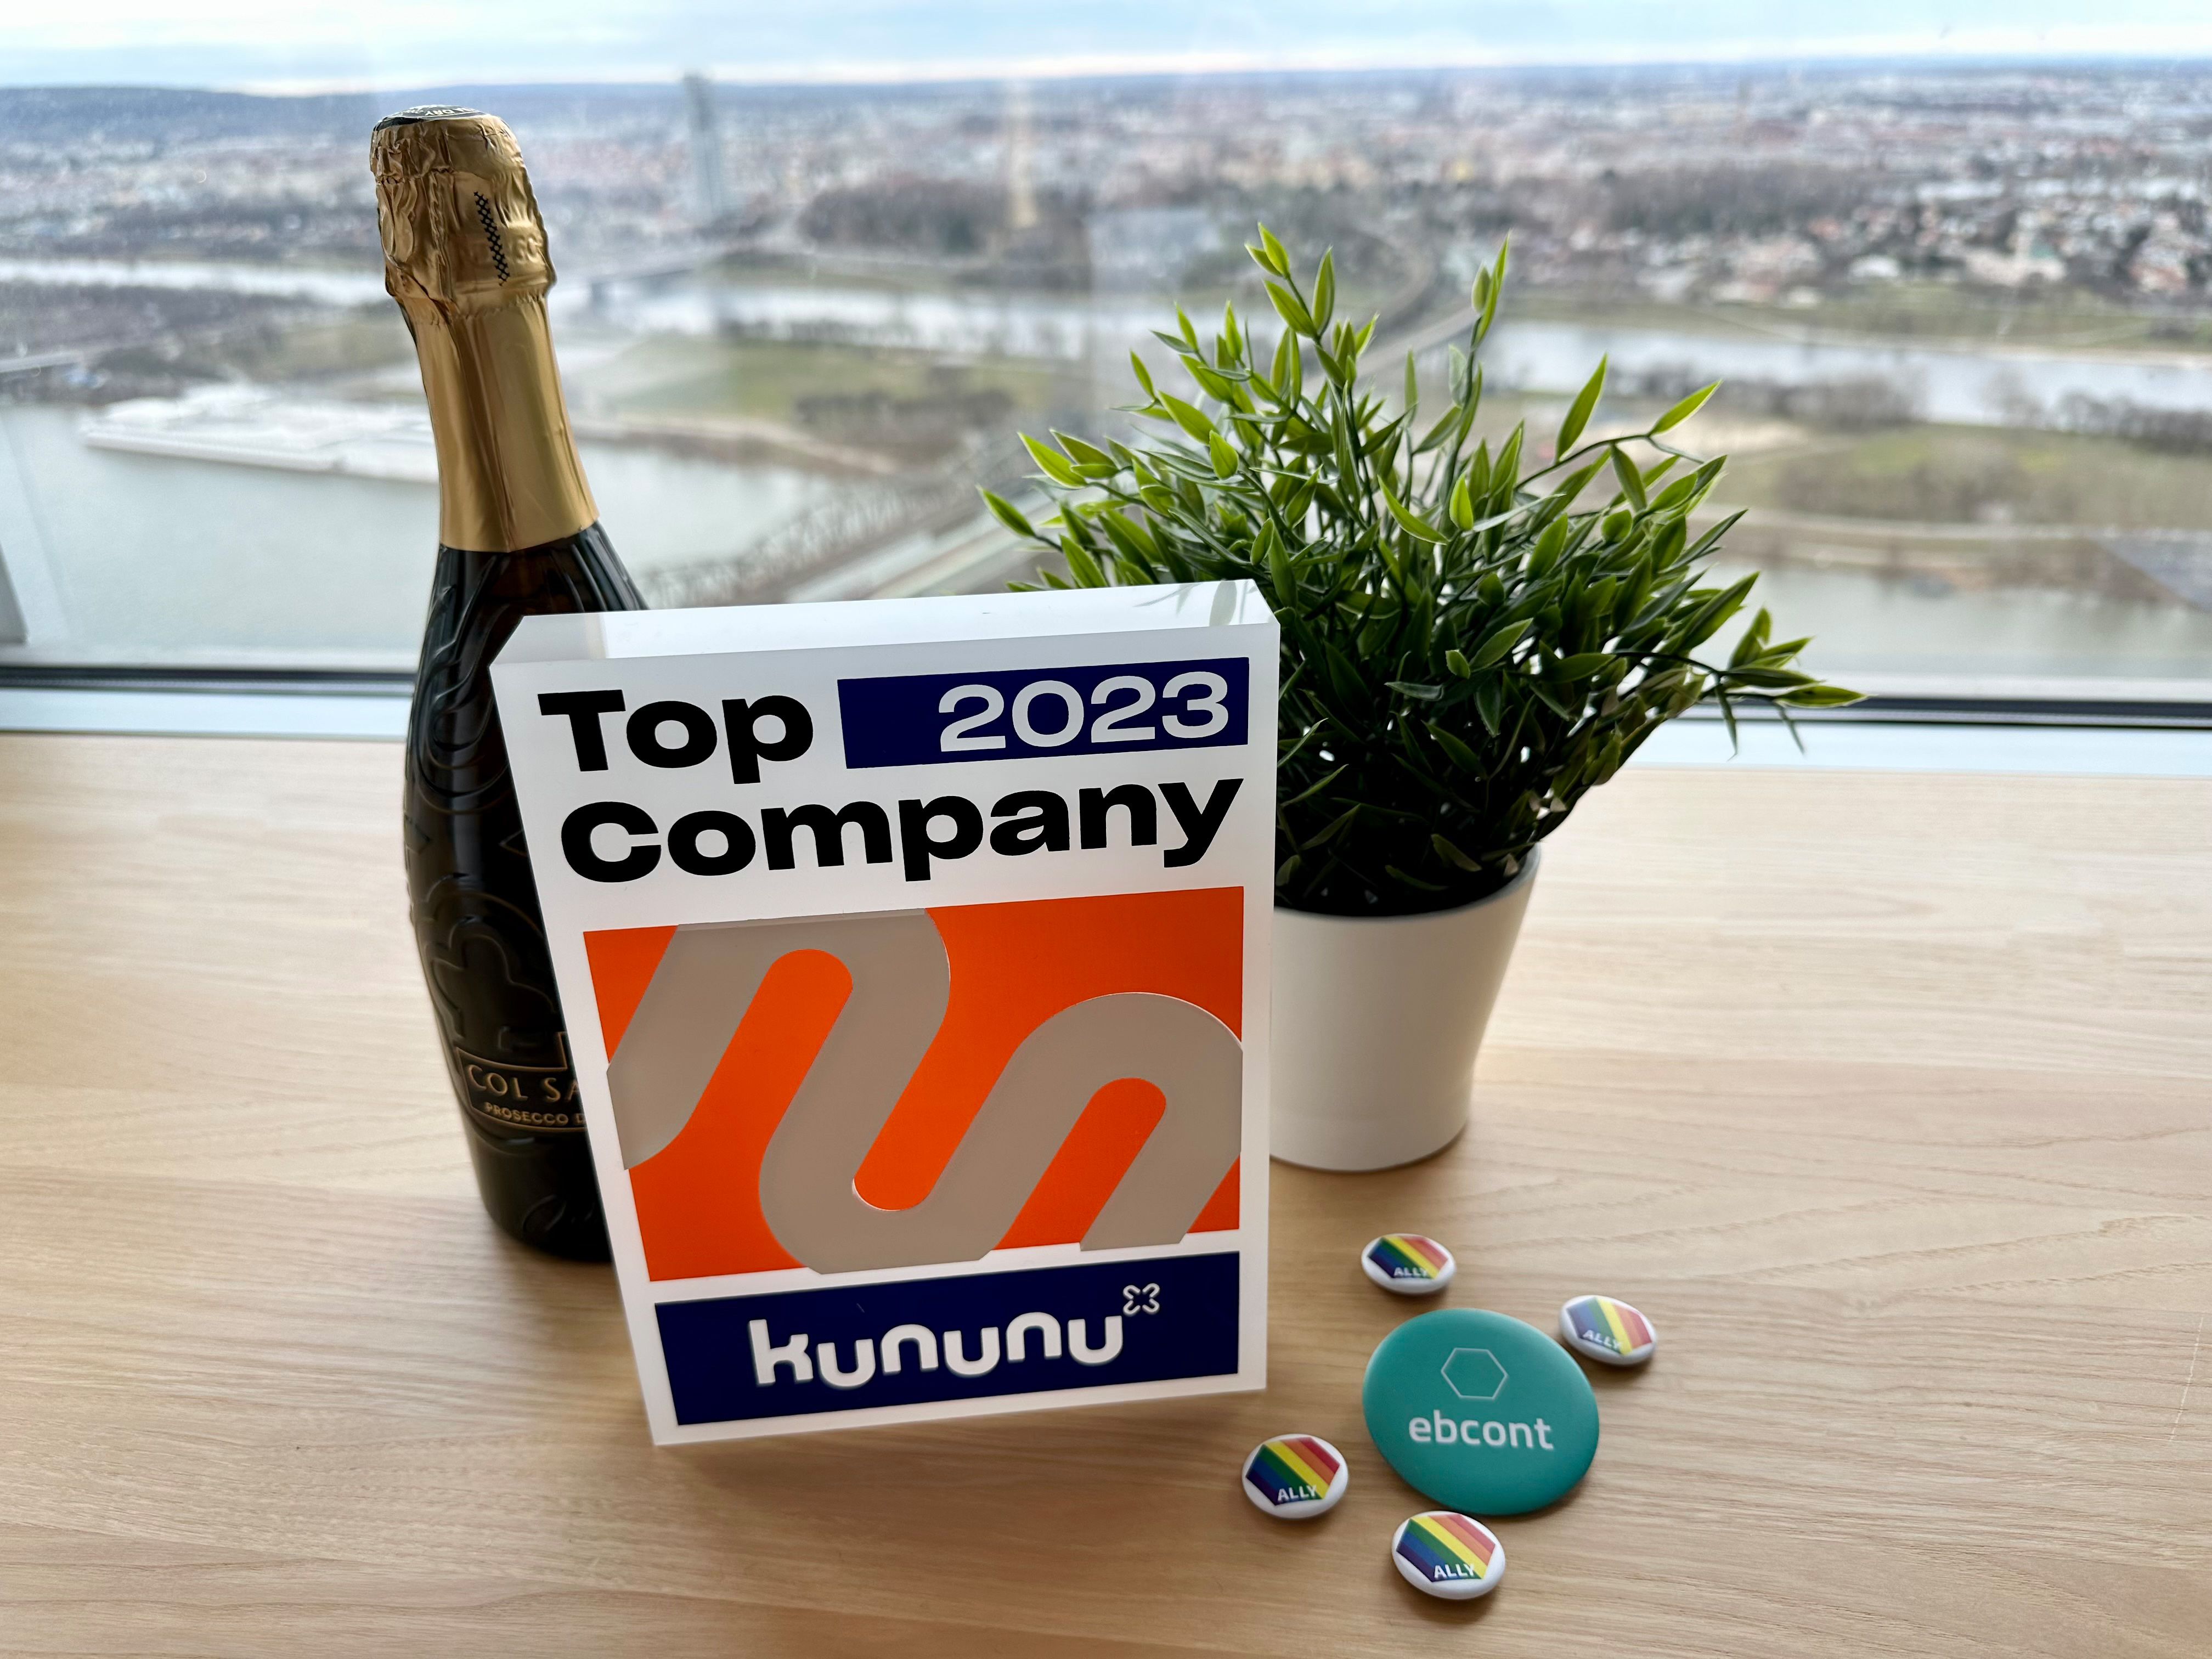 We did it again! EBCONT is again top employer of 2023.